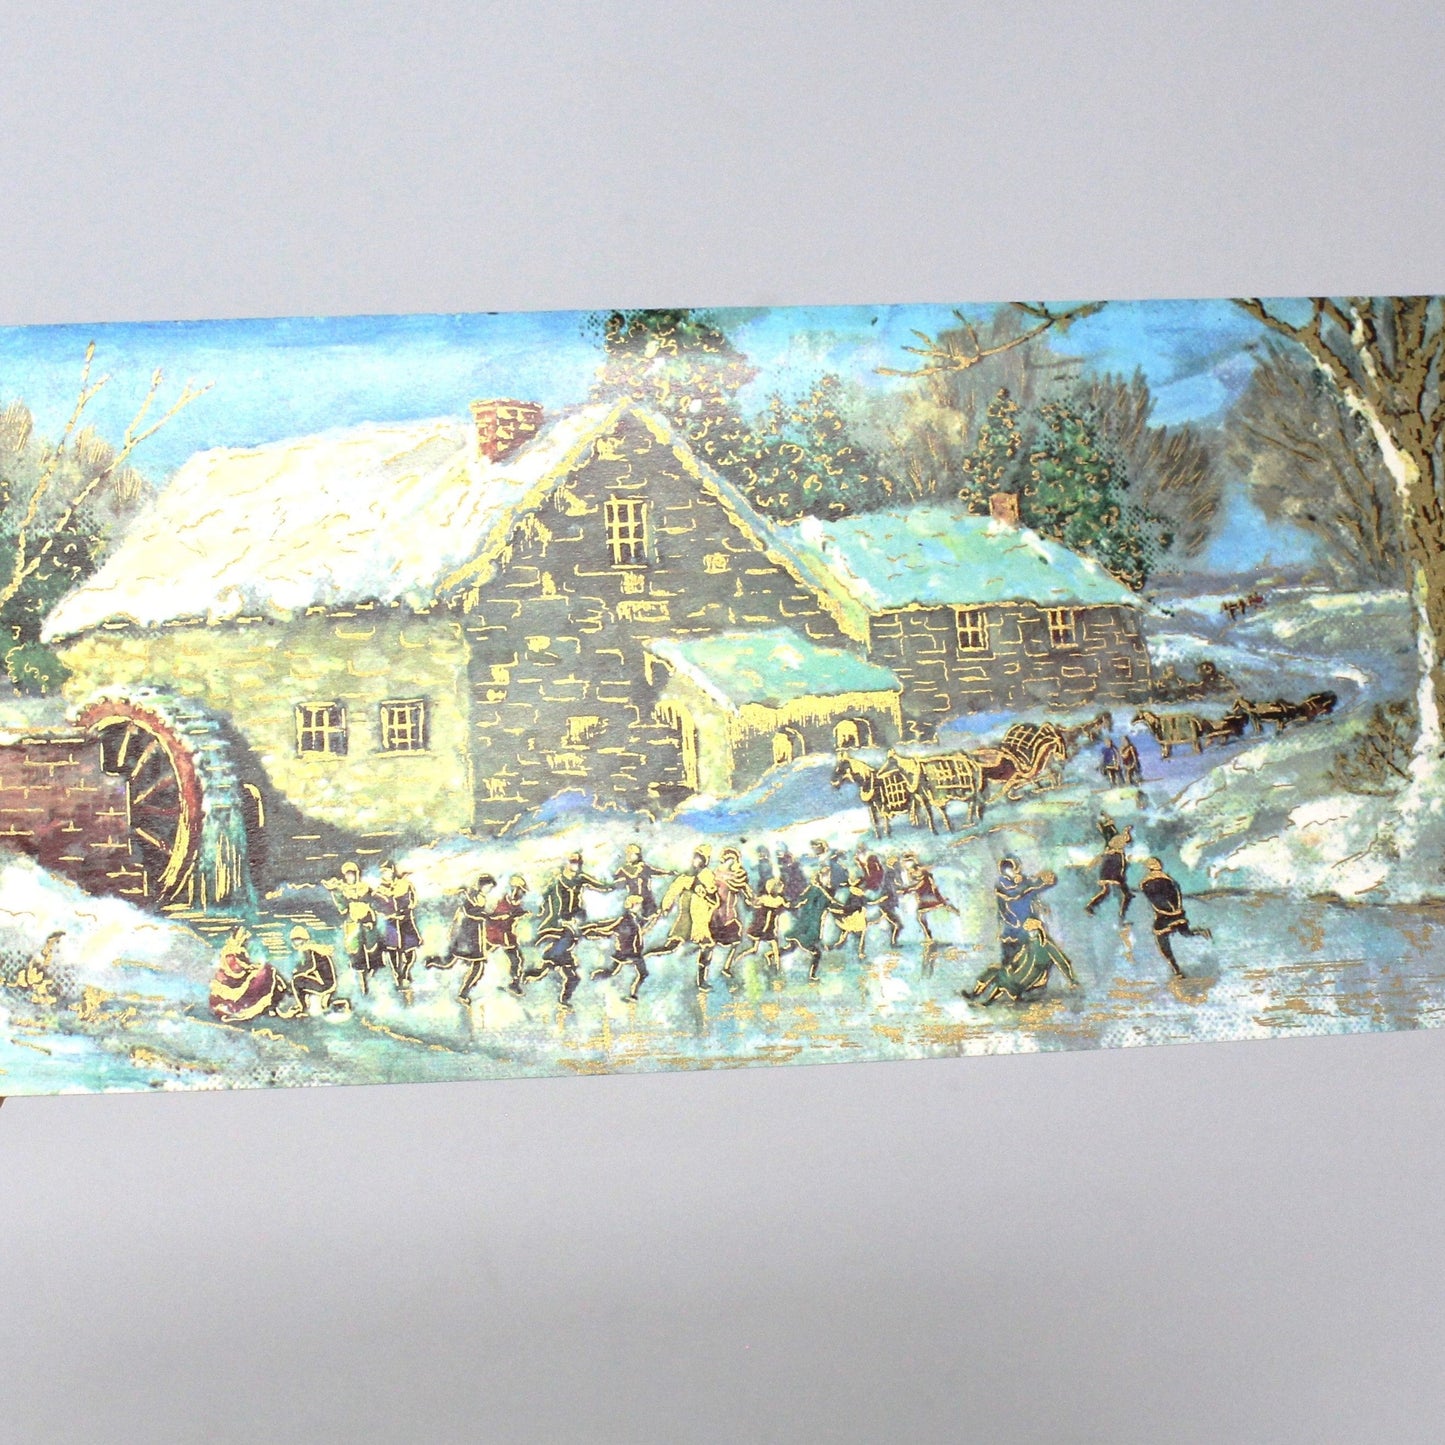 Greeting Card / Christmas Card, Art Design by Brook, Victorian Ice Skaters by Old Water Mill, Original Vintage